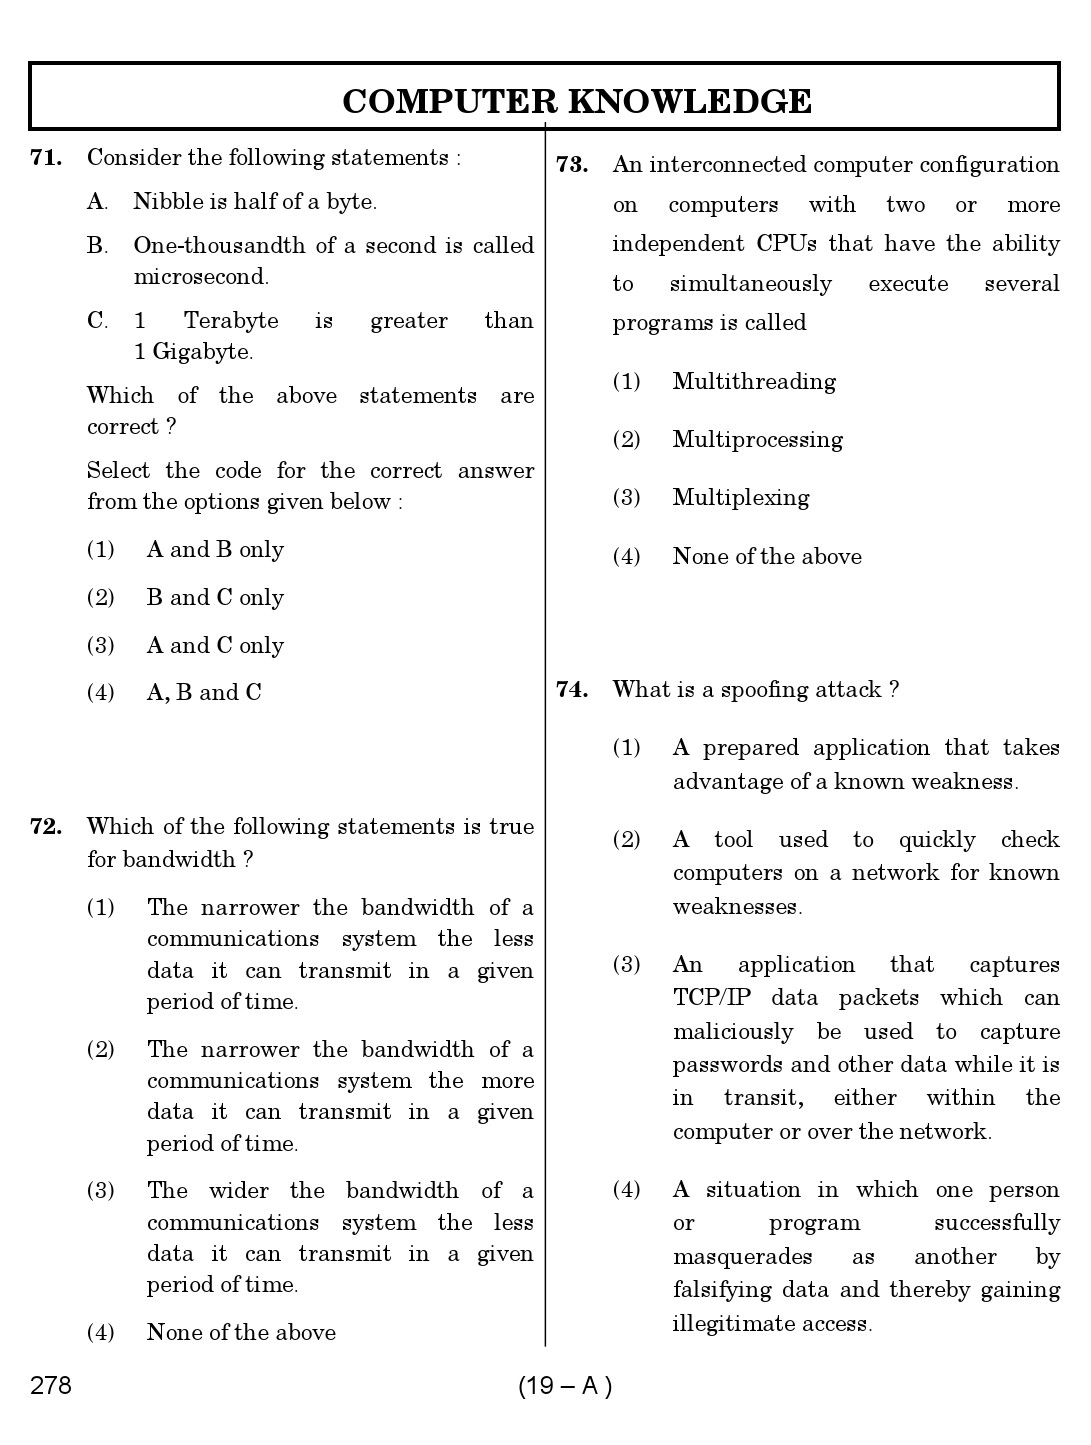 Karnataka PSC First Division Computer Assistants Exam Sample Question Paper 278 19